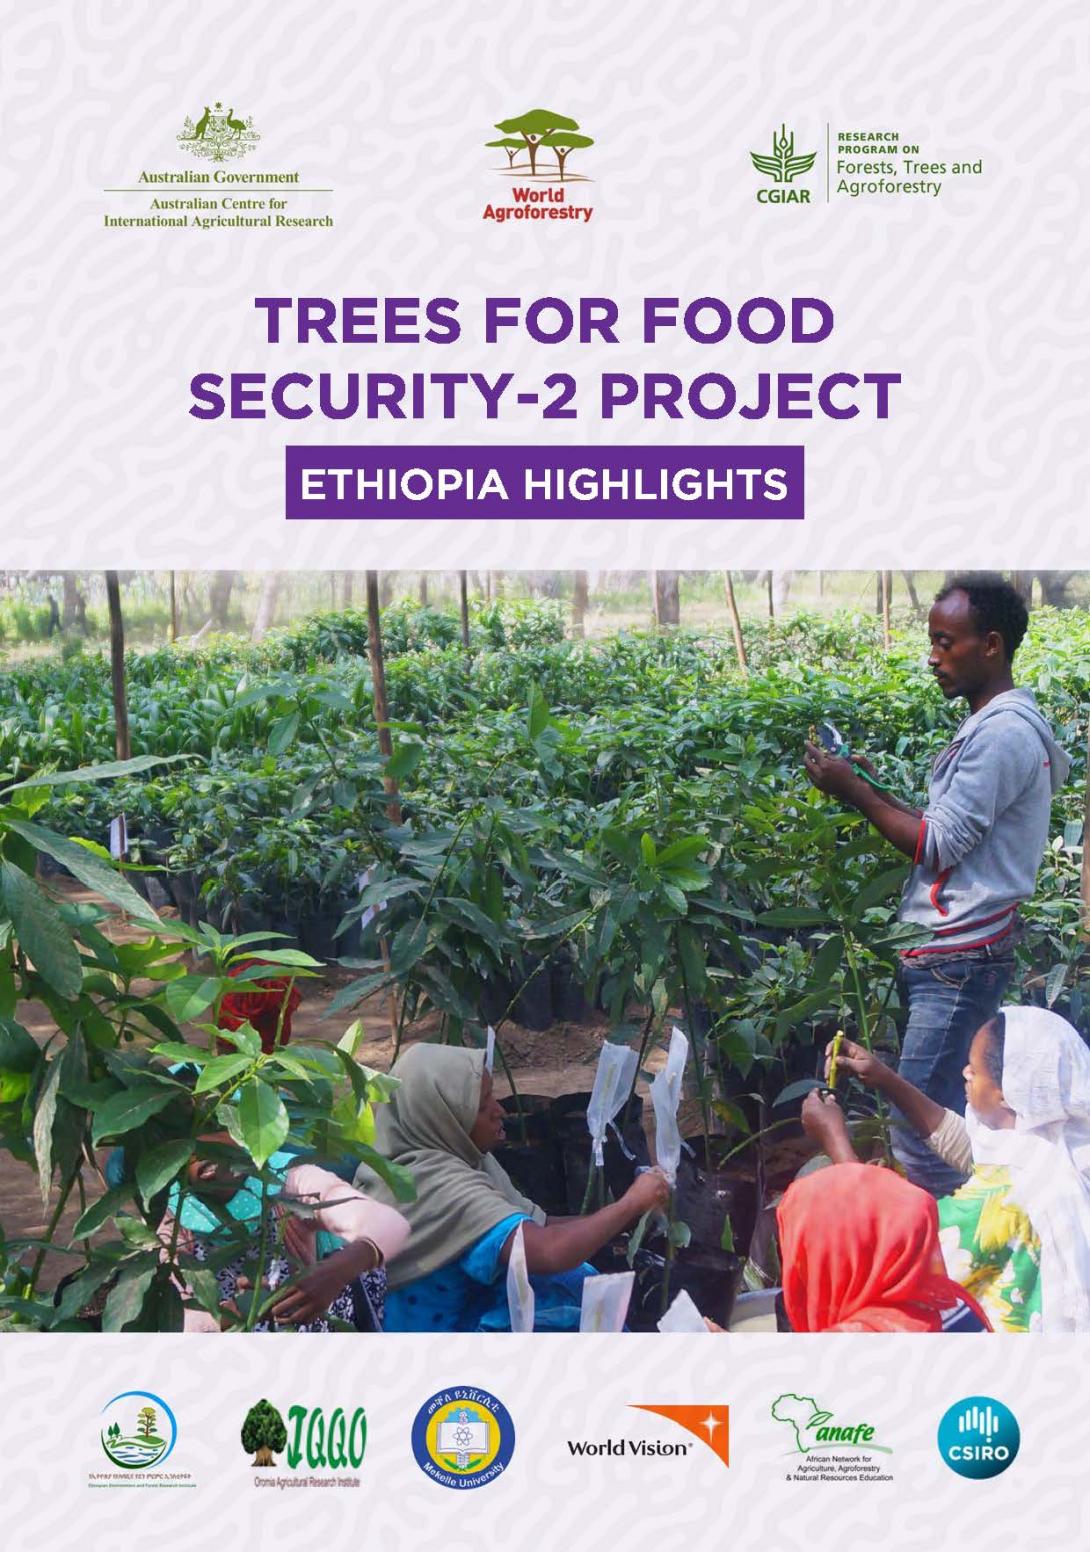 Trees For Food Security-2 Project, Ethiopia Highlights